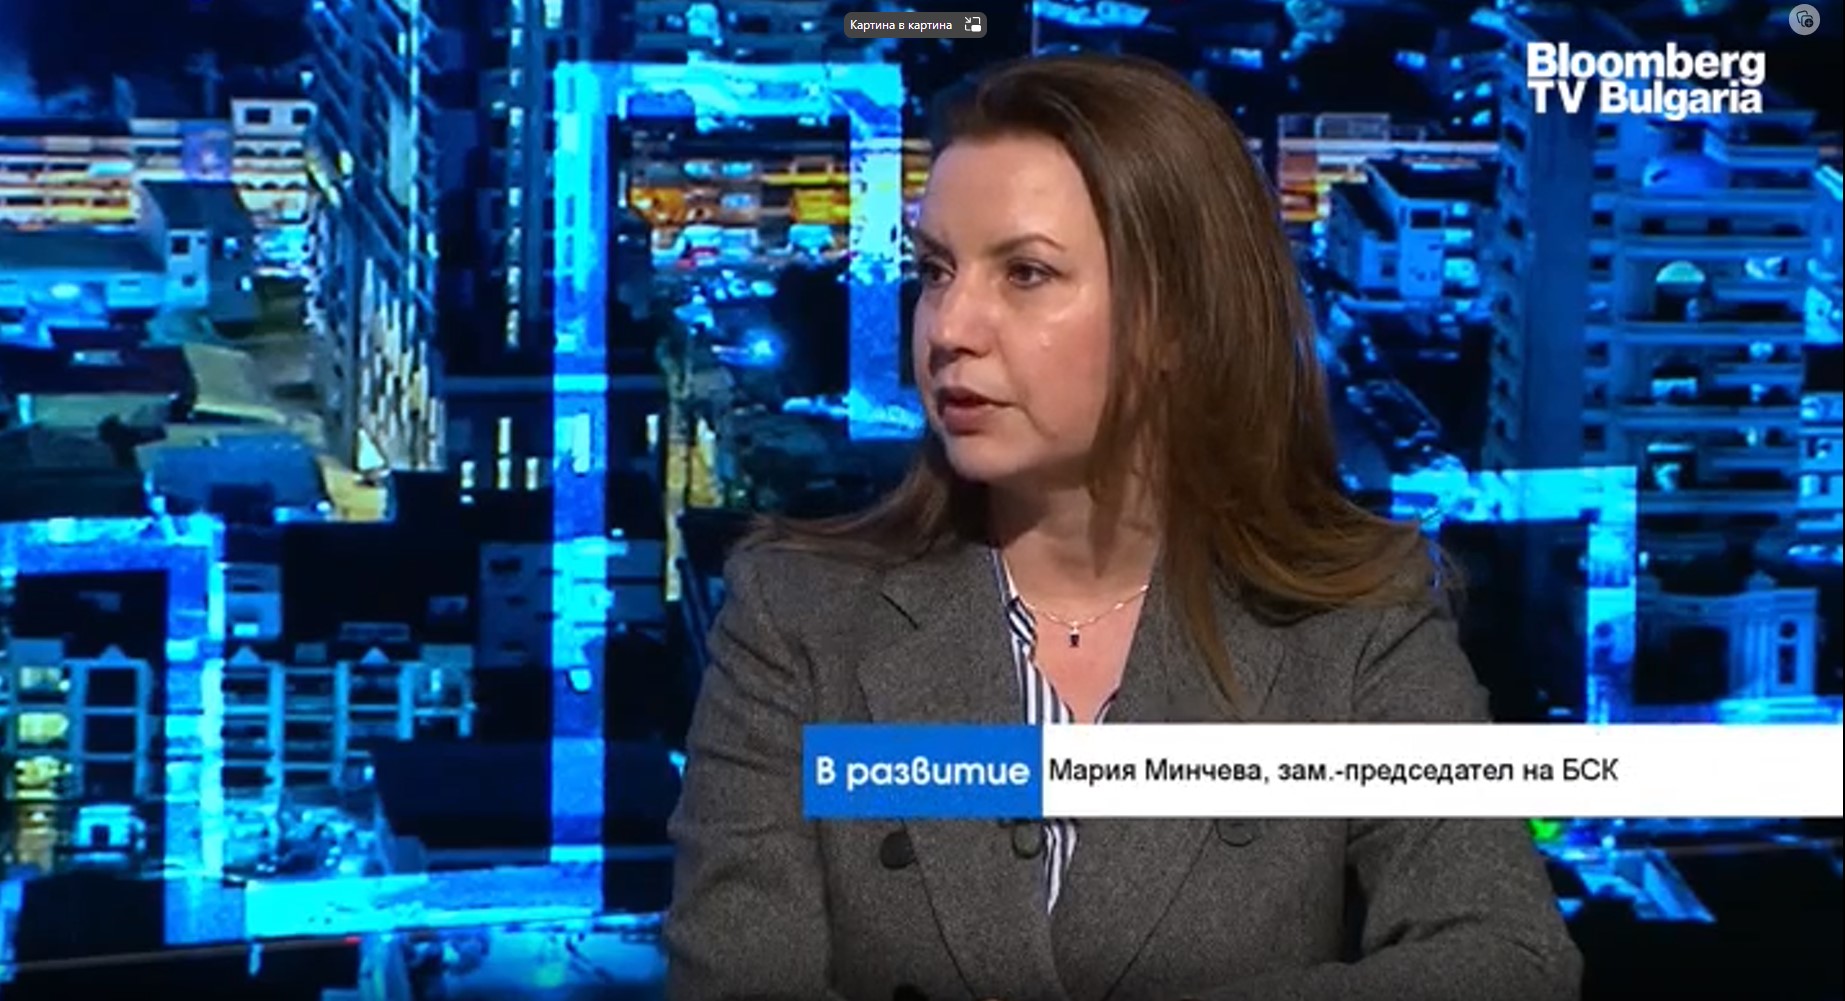 MARIYA MINCHEVA: WE DO NOT SEE THE ECONOMY AS A PRIORITY FOR POLITICIANS